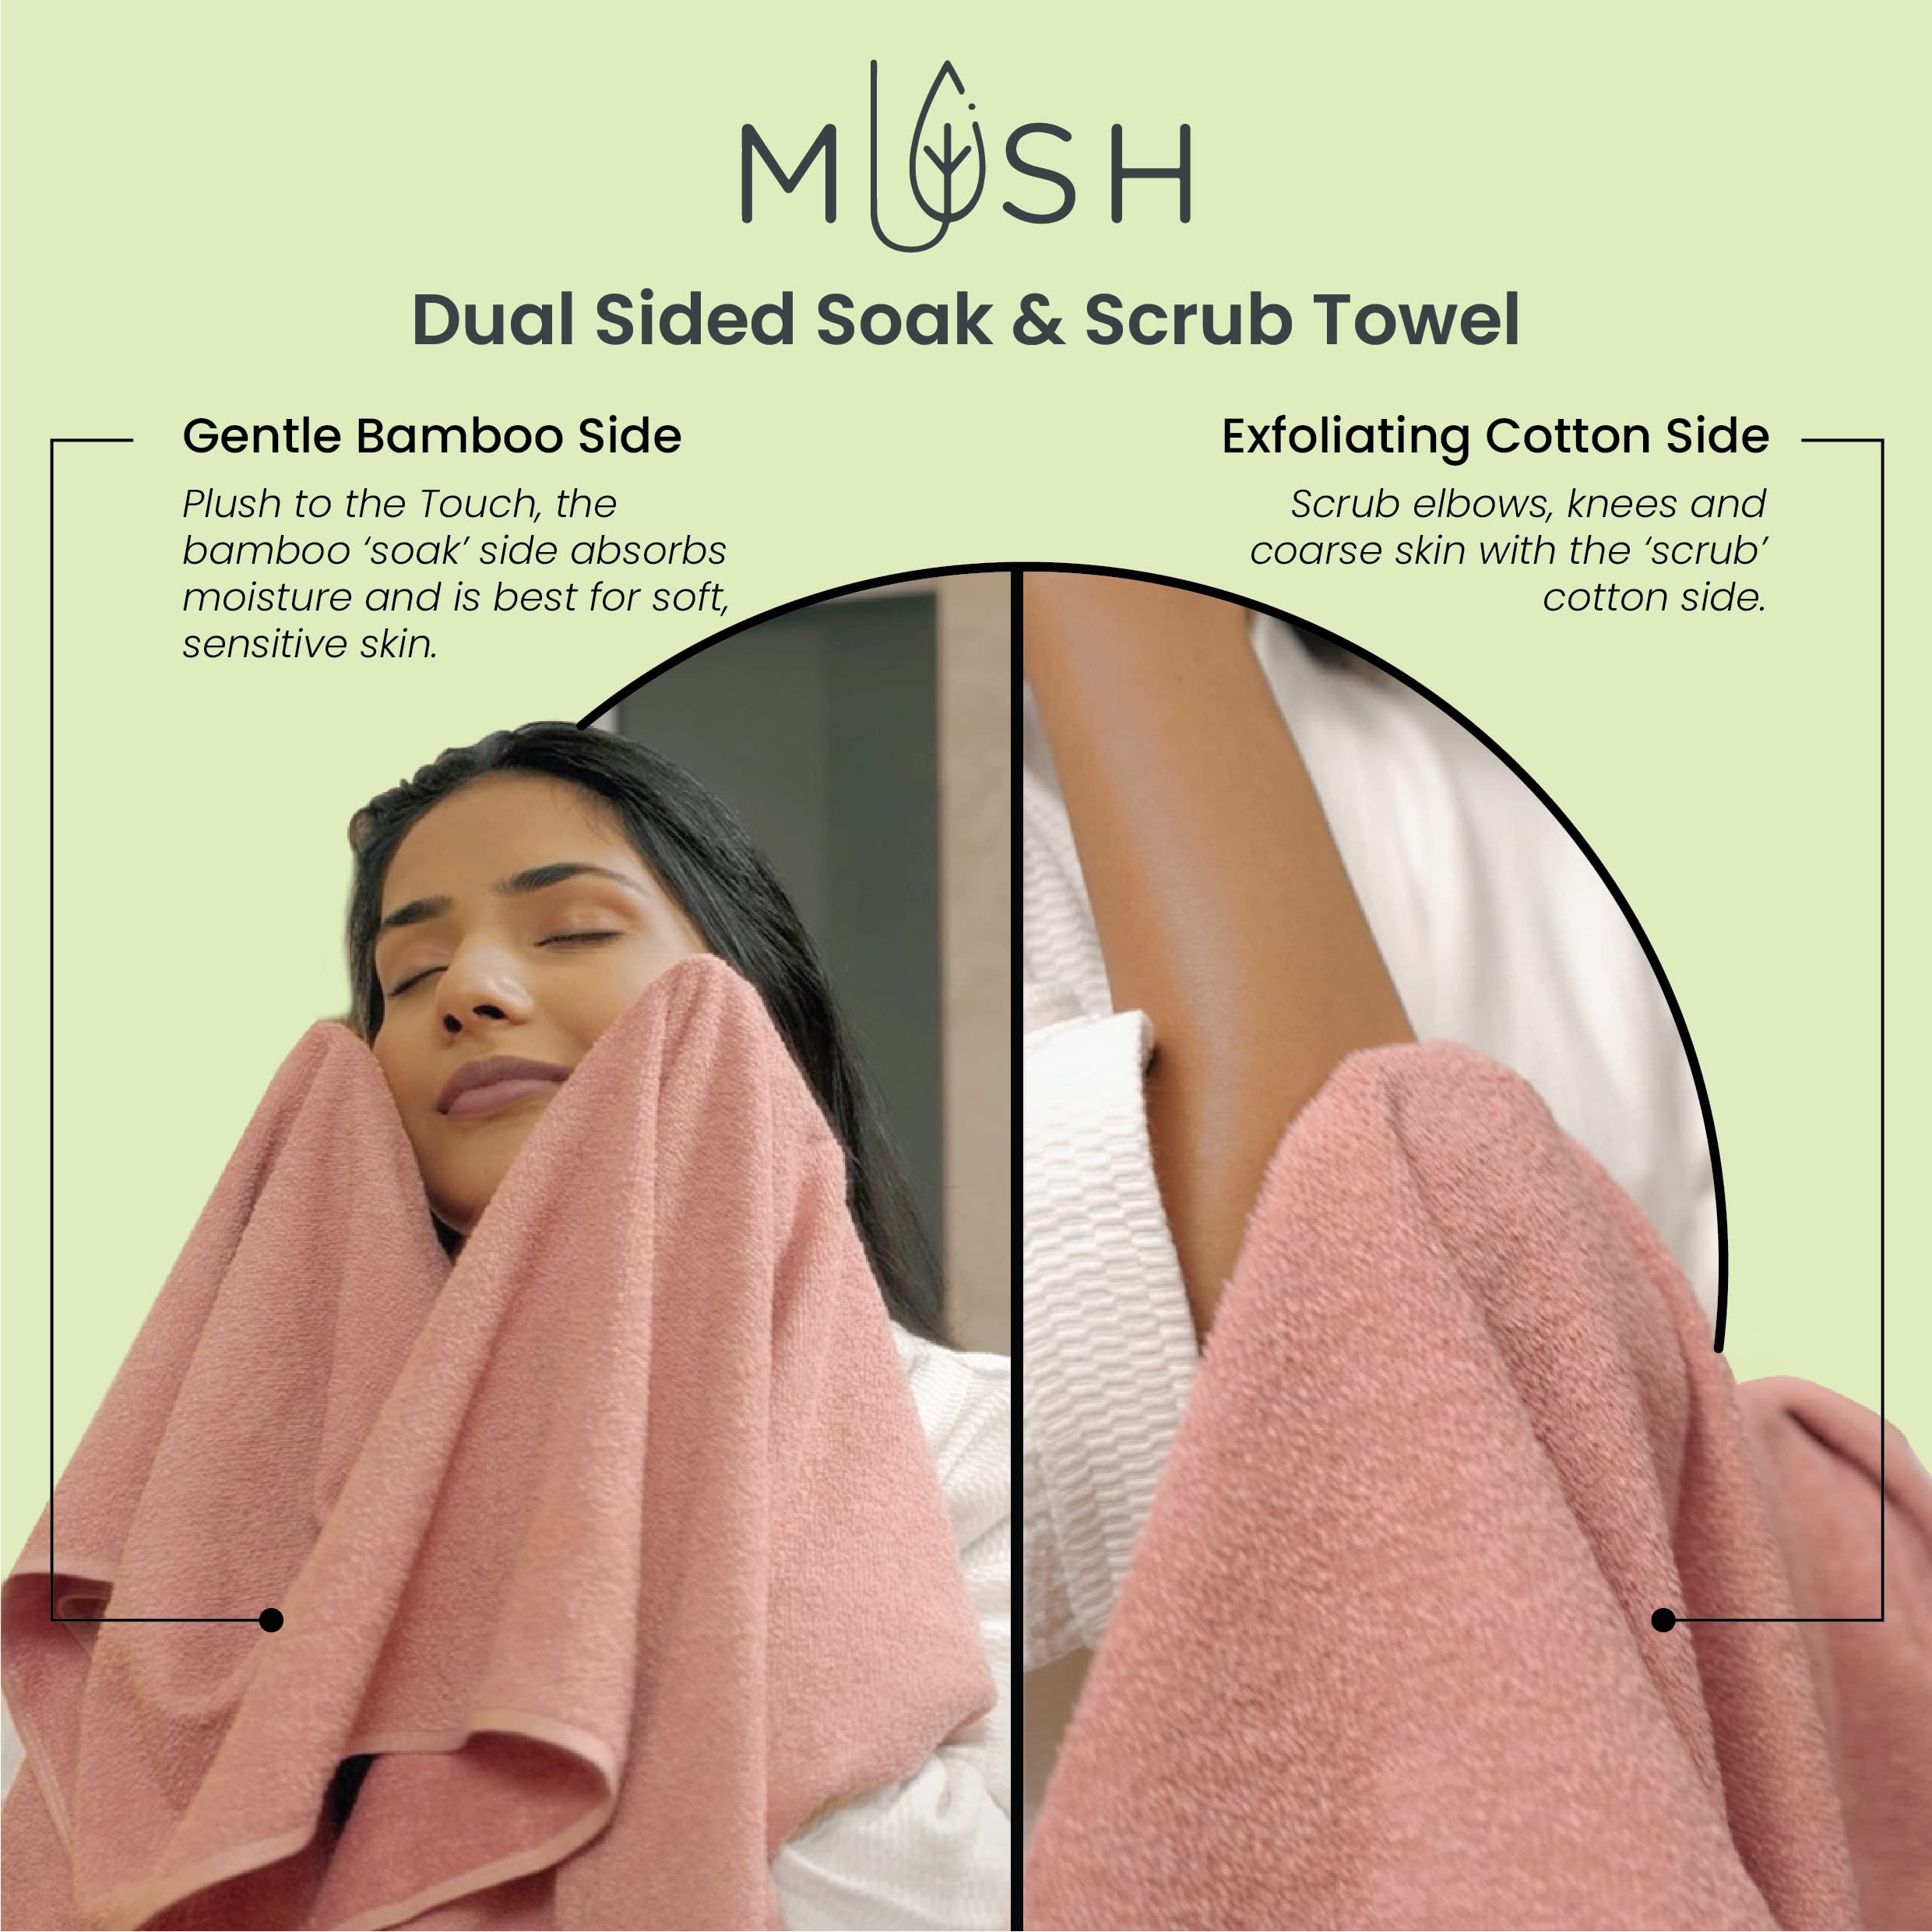 Mush Duo - One Side Soft Bamboo Other Side Rough Cotton - Special Dual Textured Towel for Gentle Cleanse & Exfoliation (1, Coral Orange)